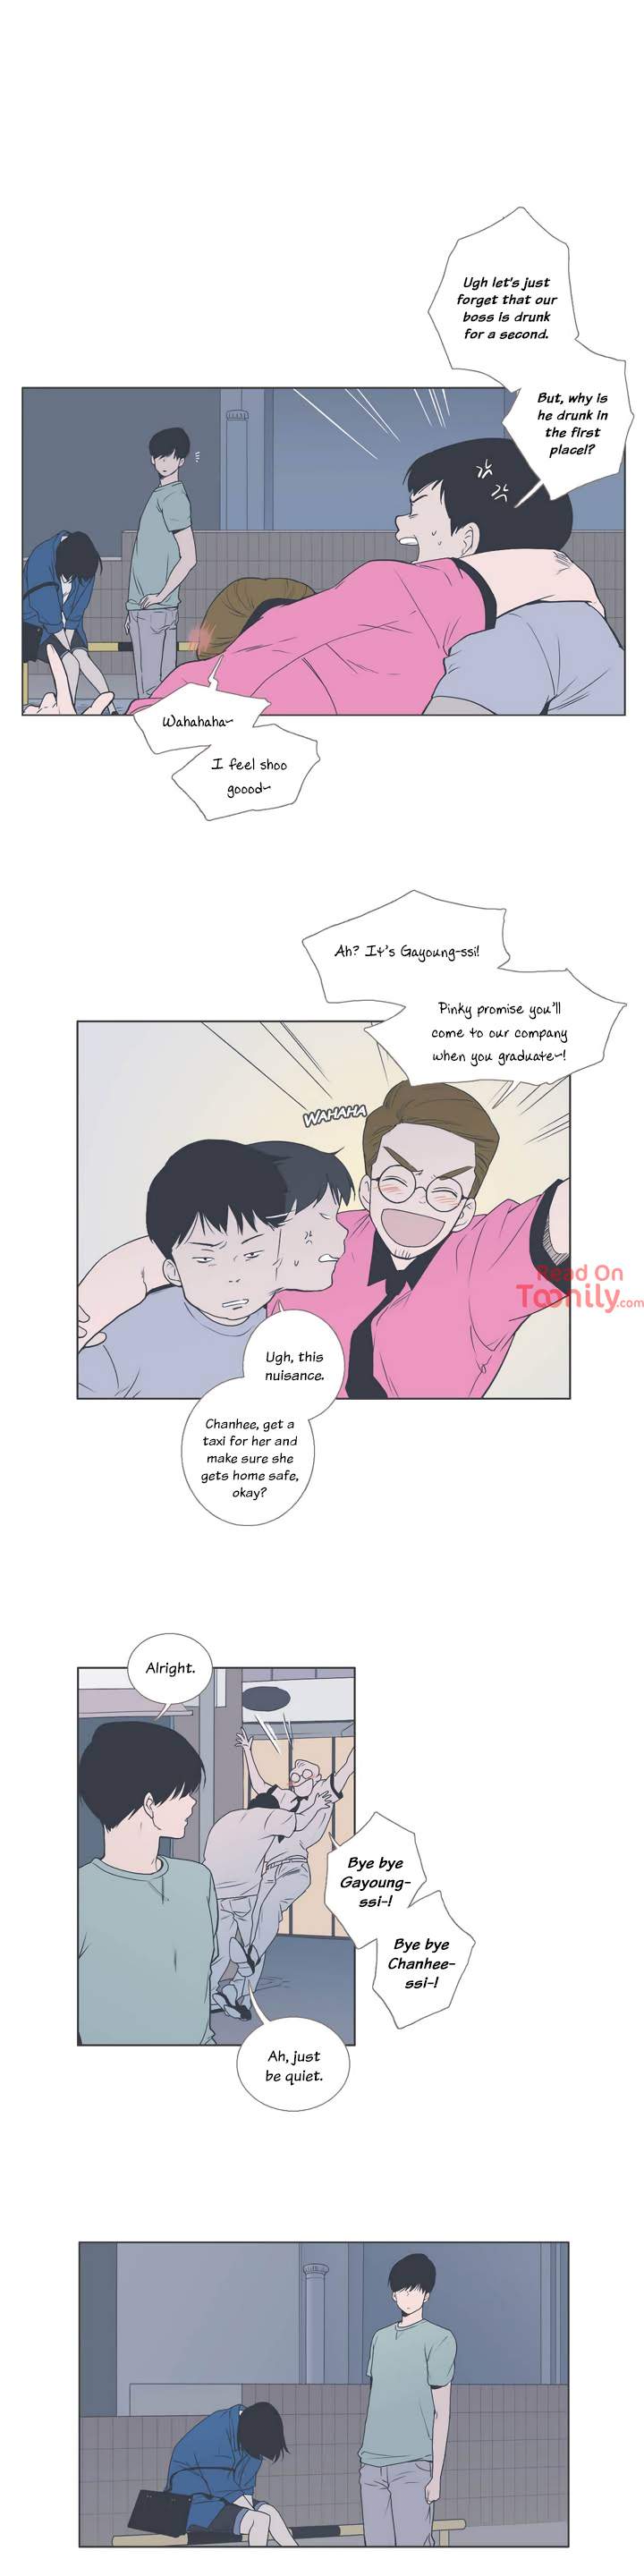 Something About Us - Chapter 33 Page 2